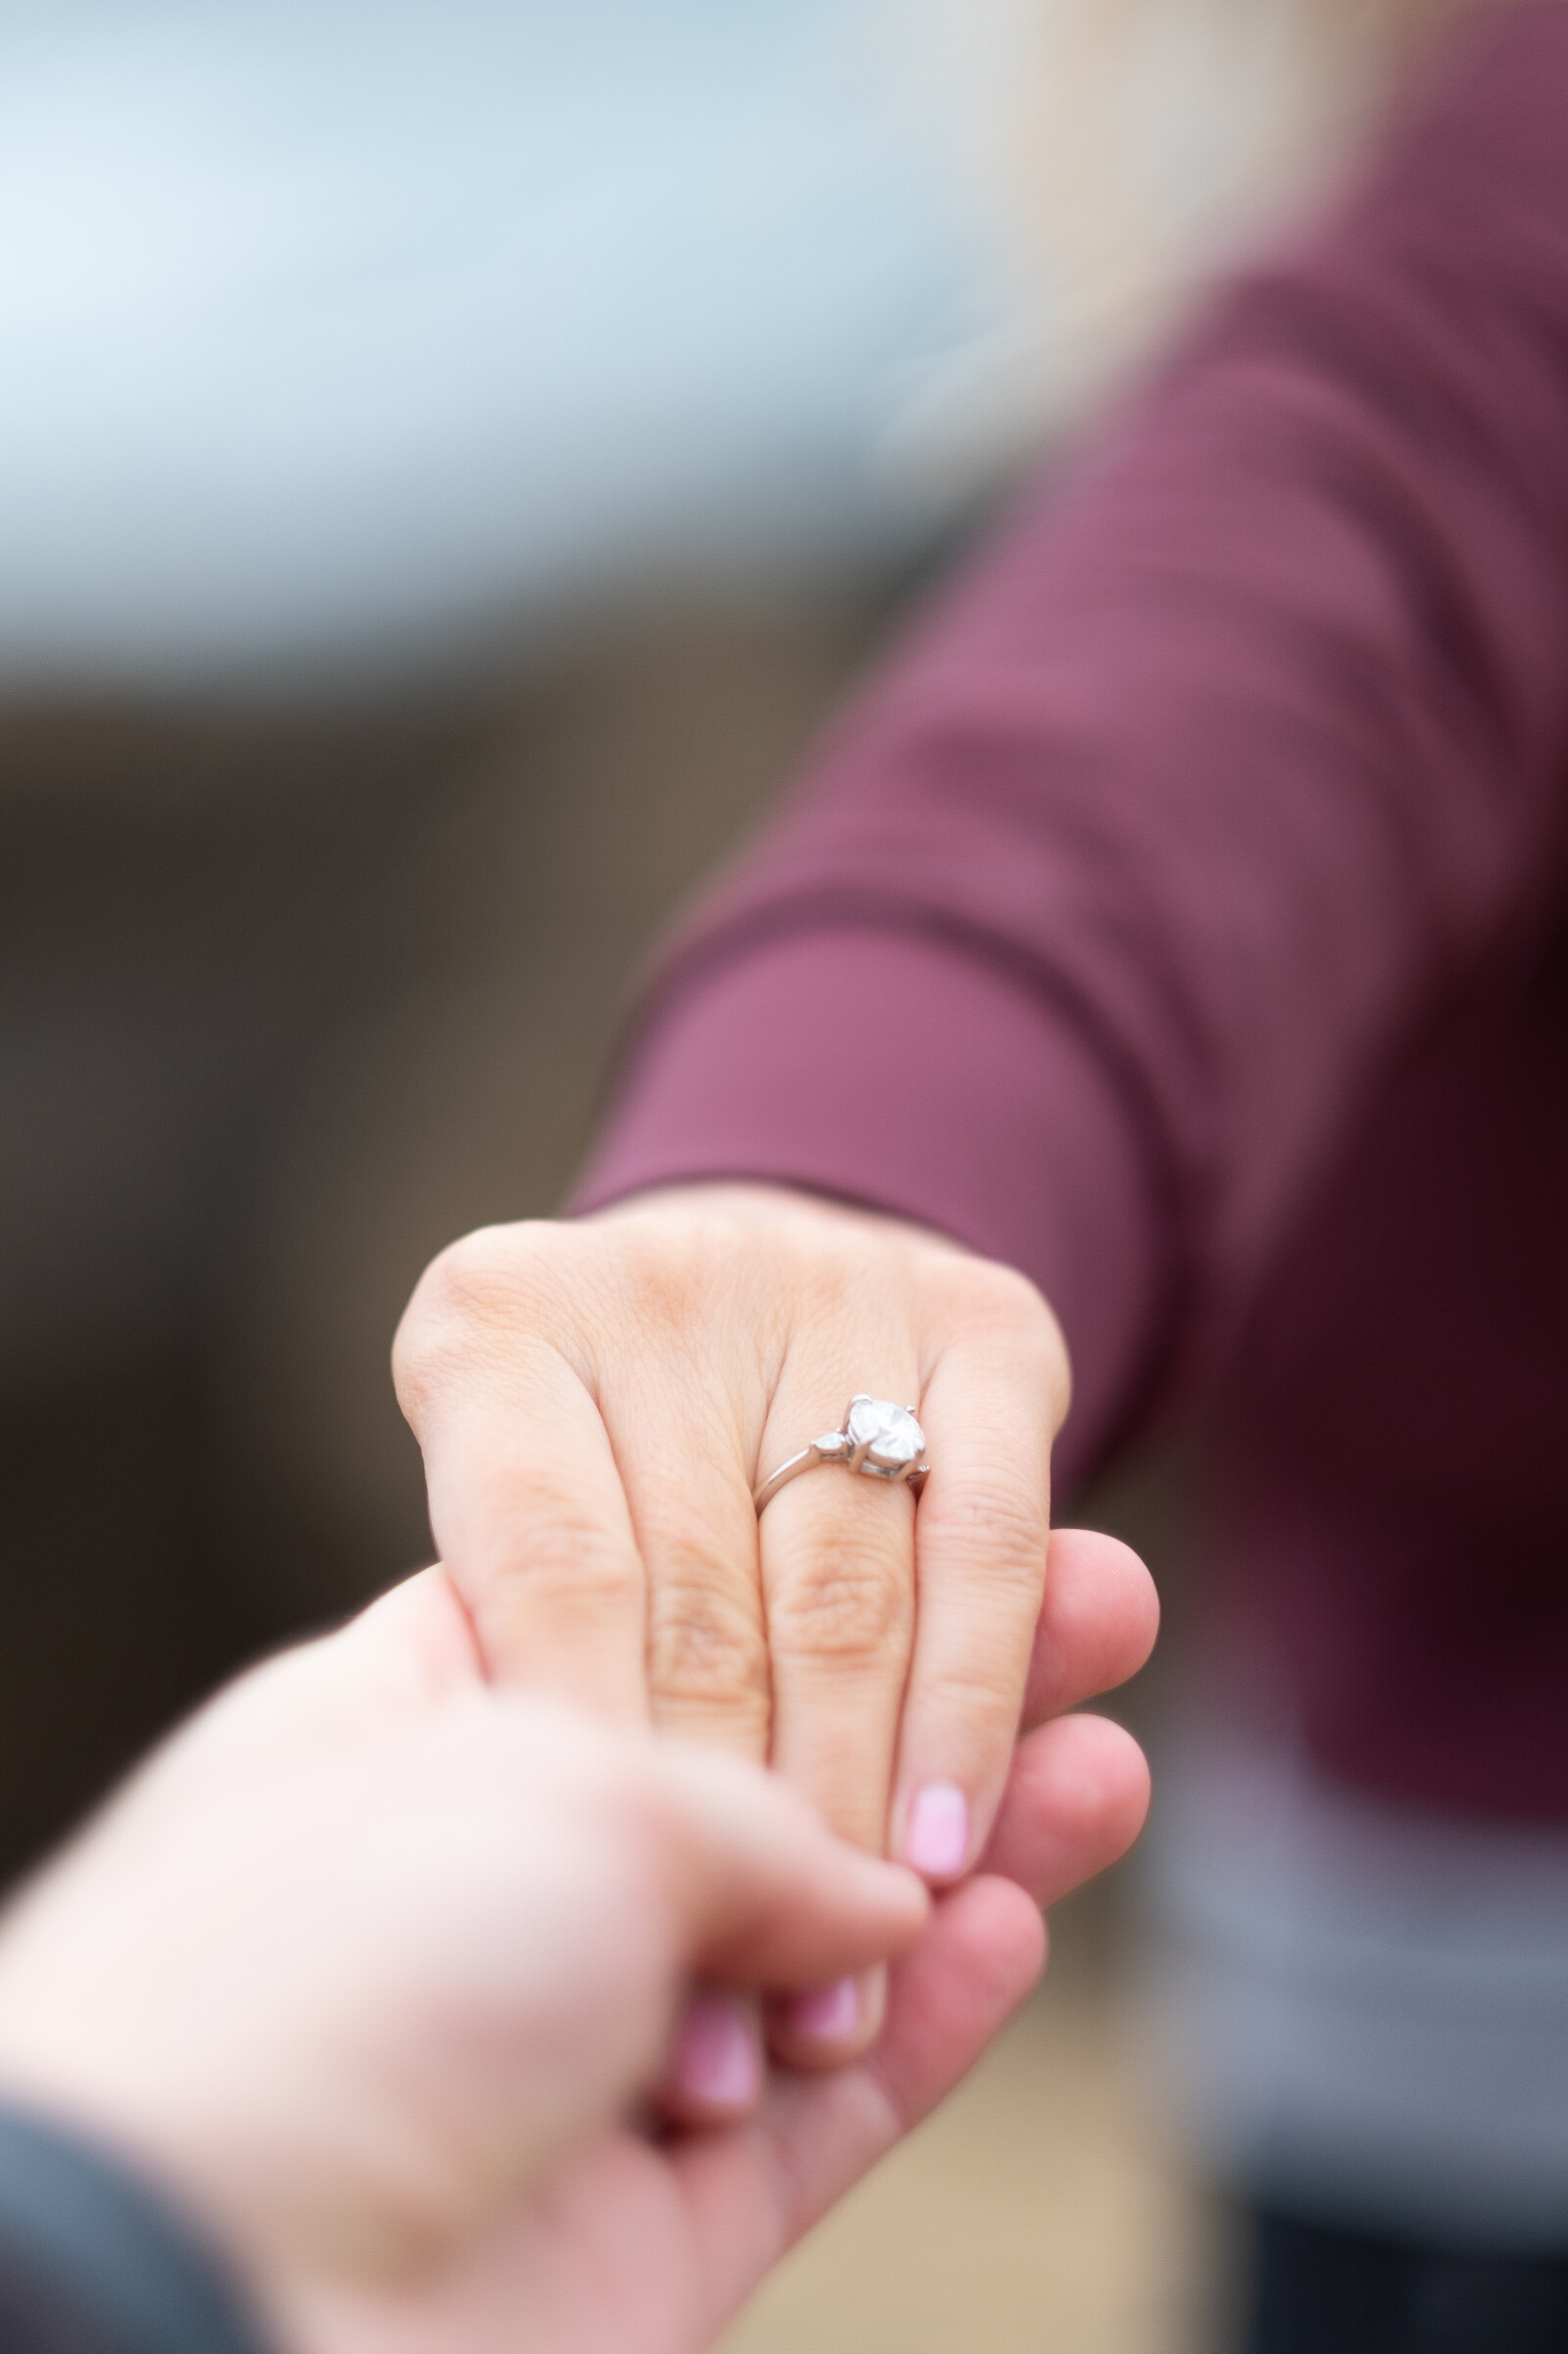 What to Look for When Choosing an Engagement Ring